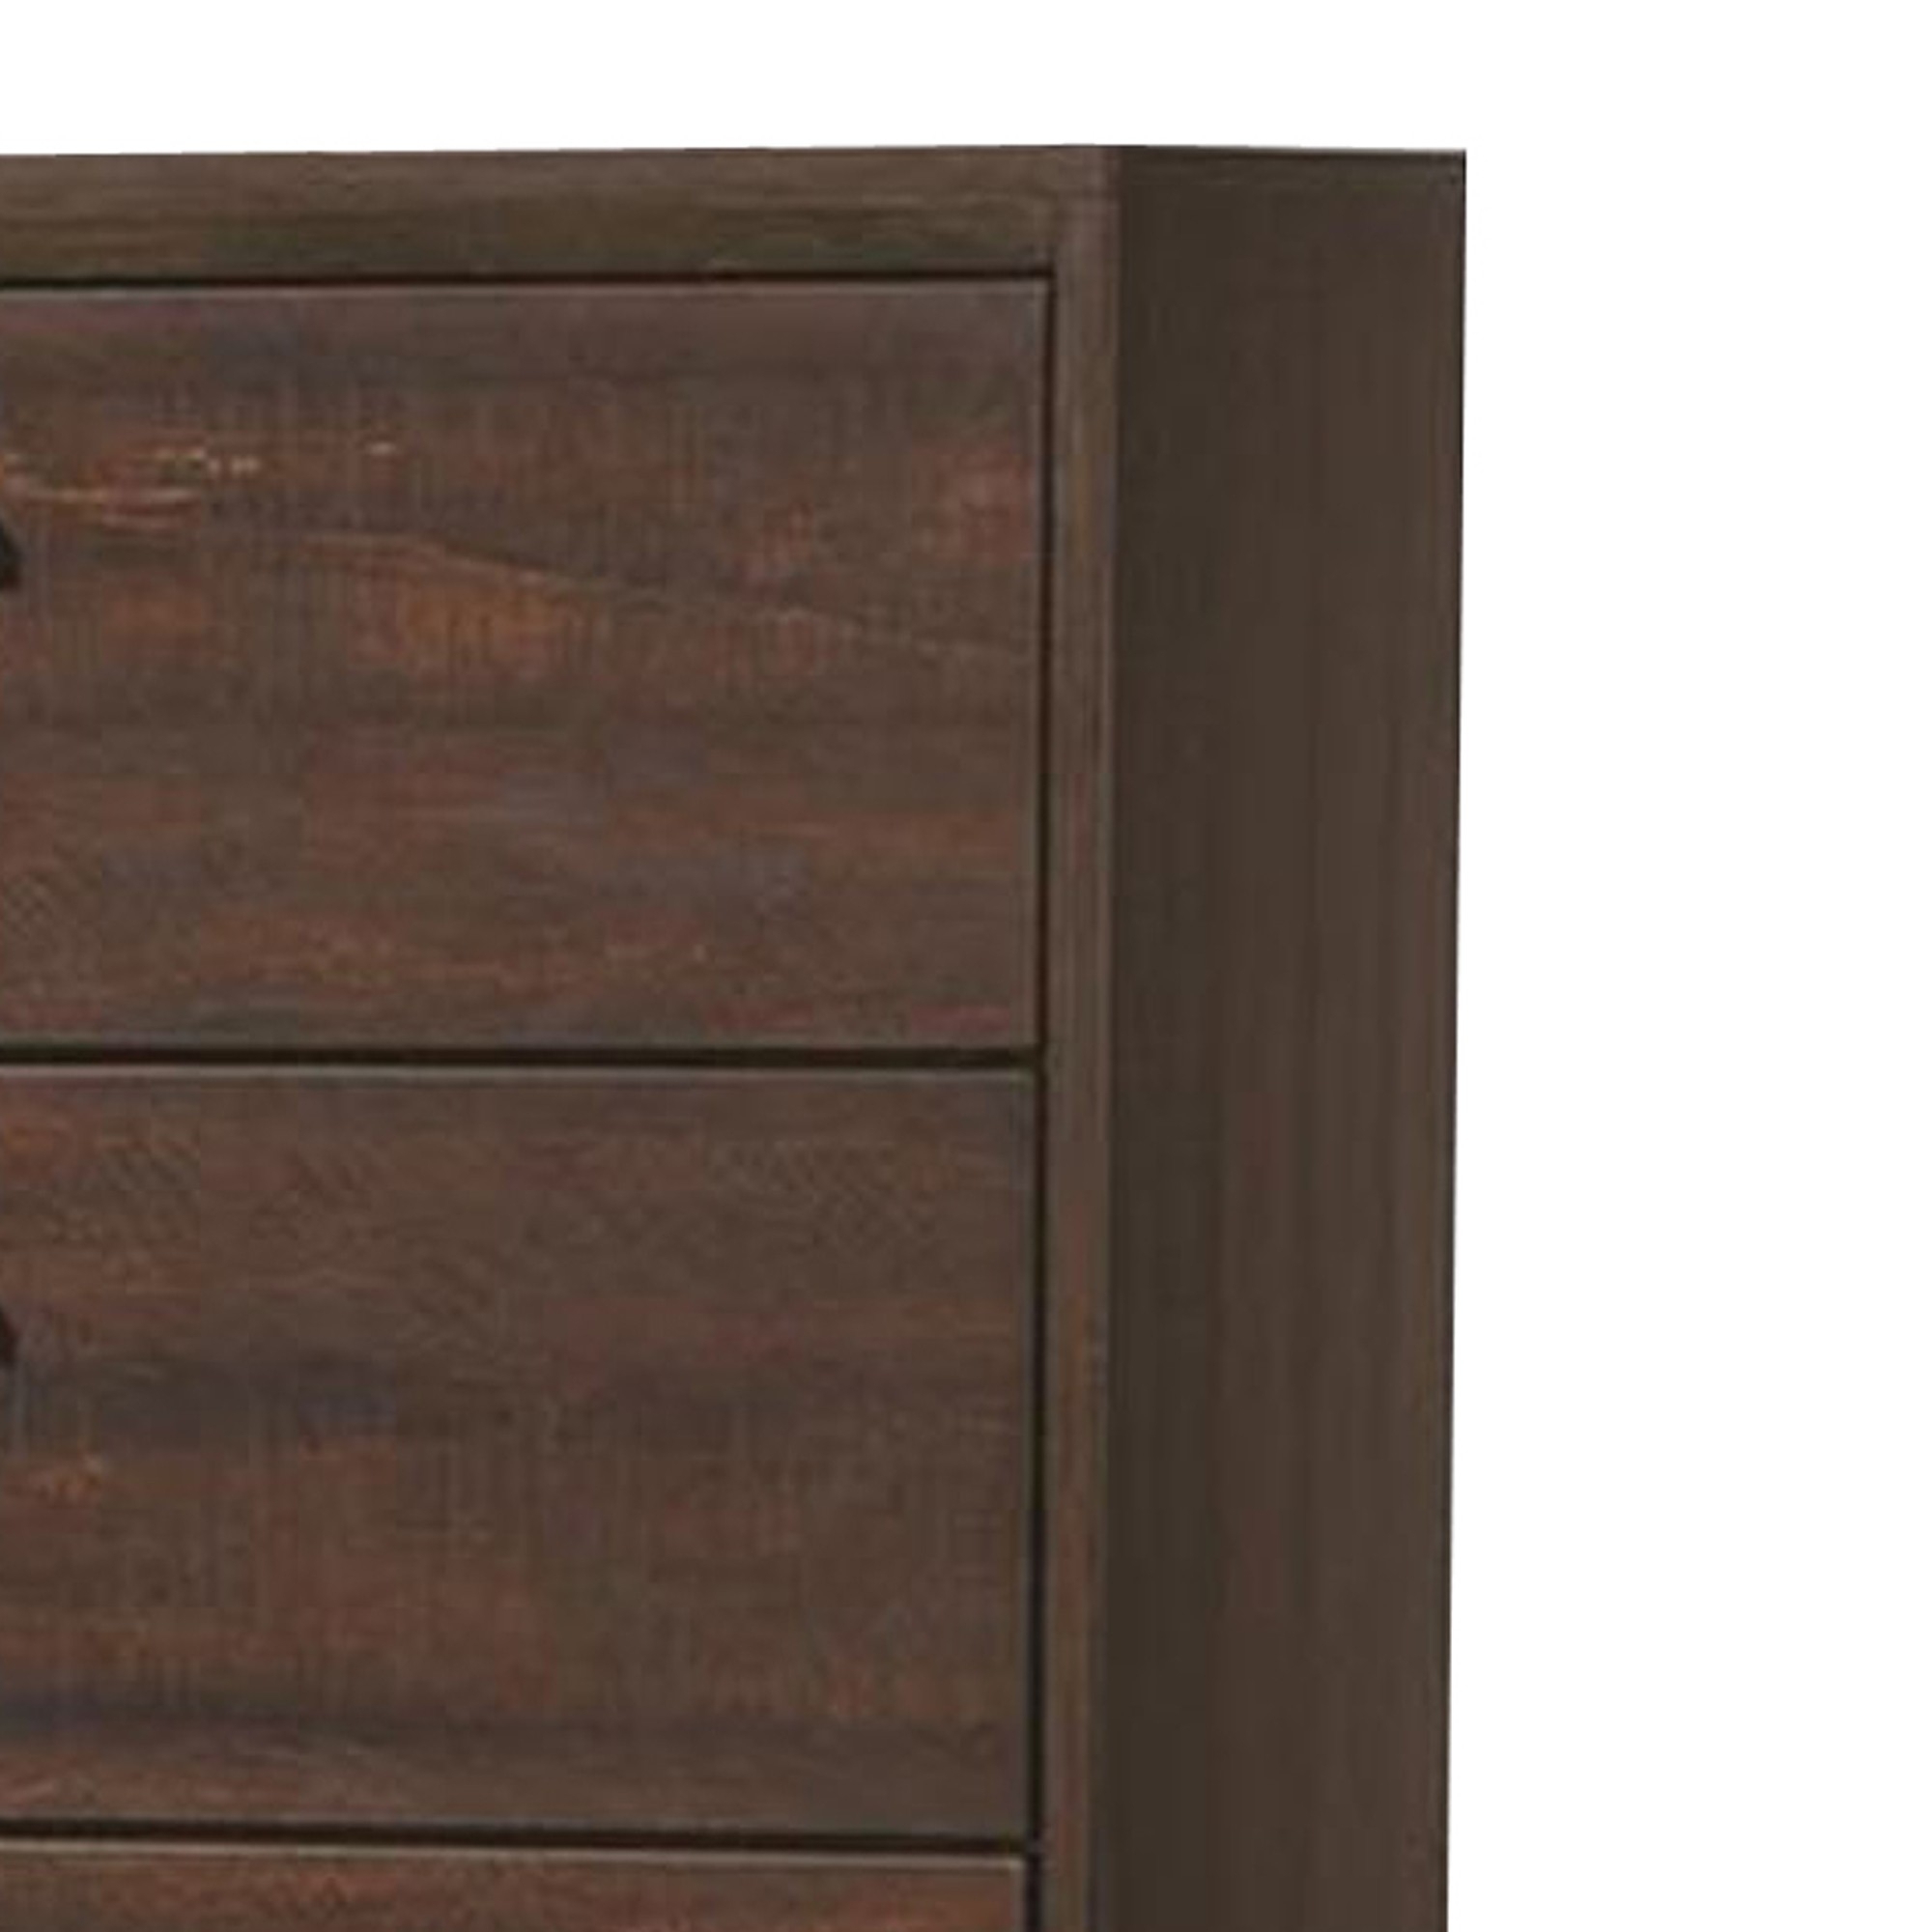 Wooden Chest With Five Drawers And Block Legs Support, Dark Brown- Saltoro Sherpi